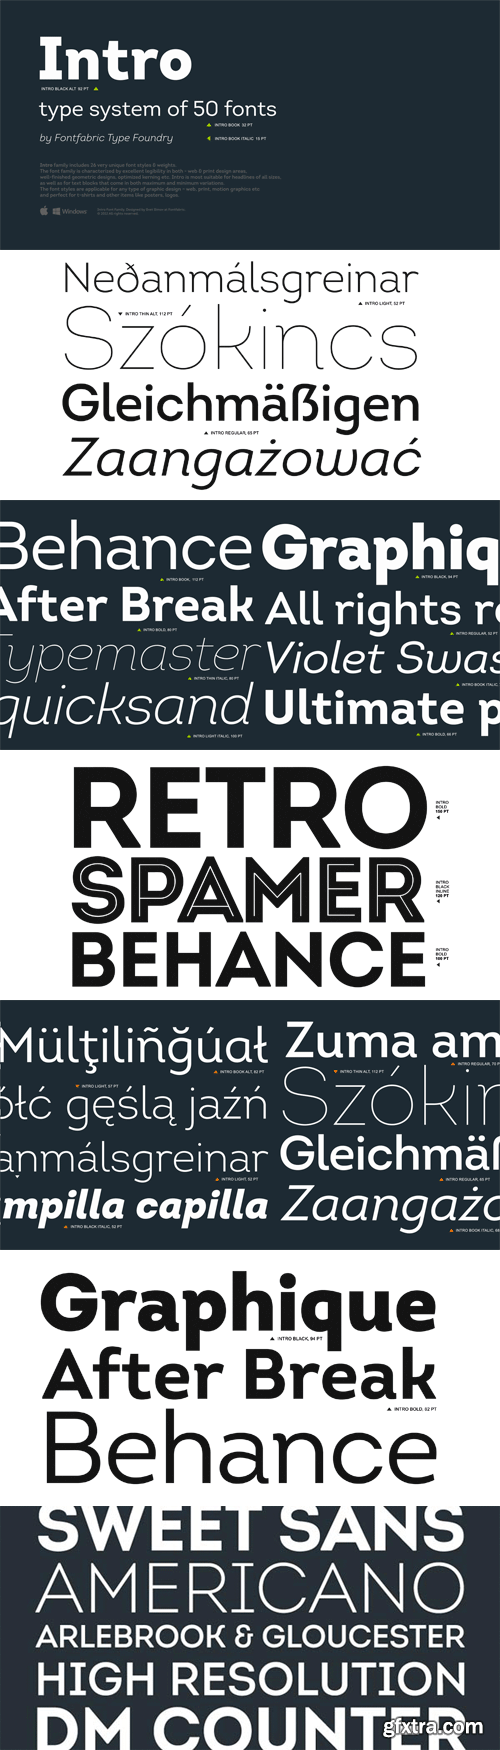 Intro Font Family - 51 Fonts for $279